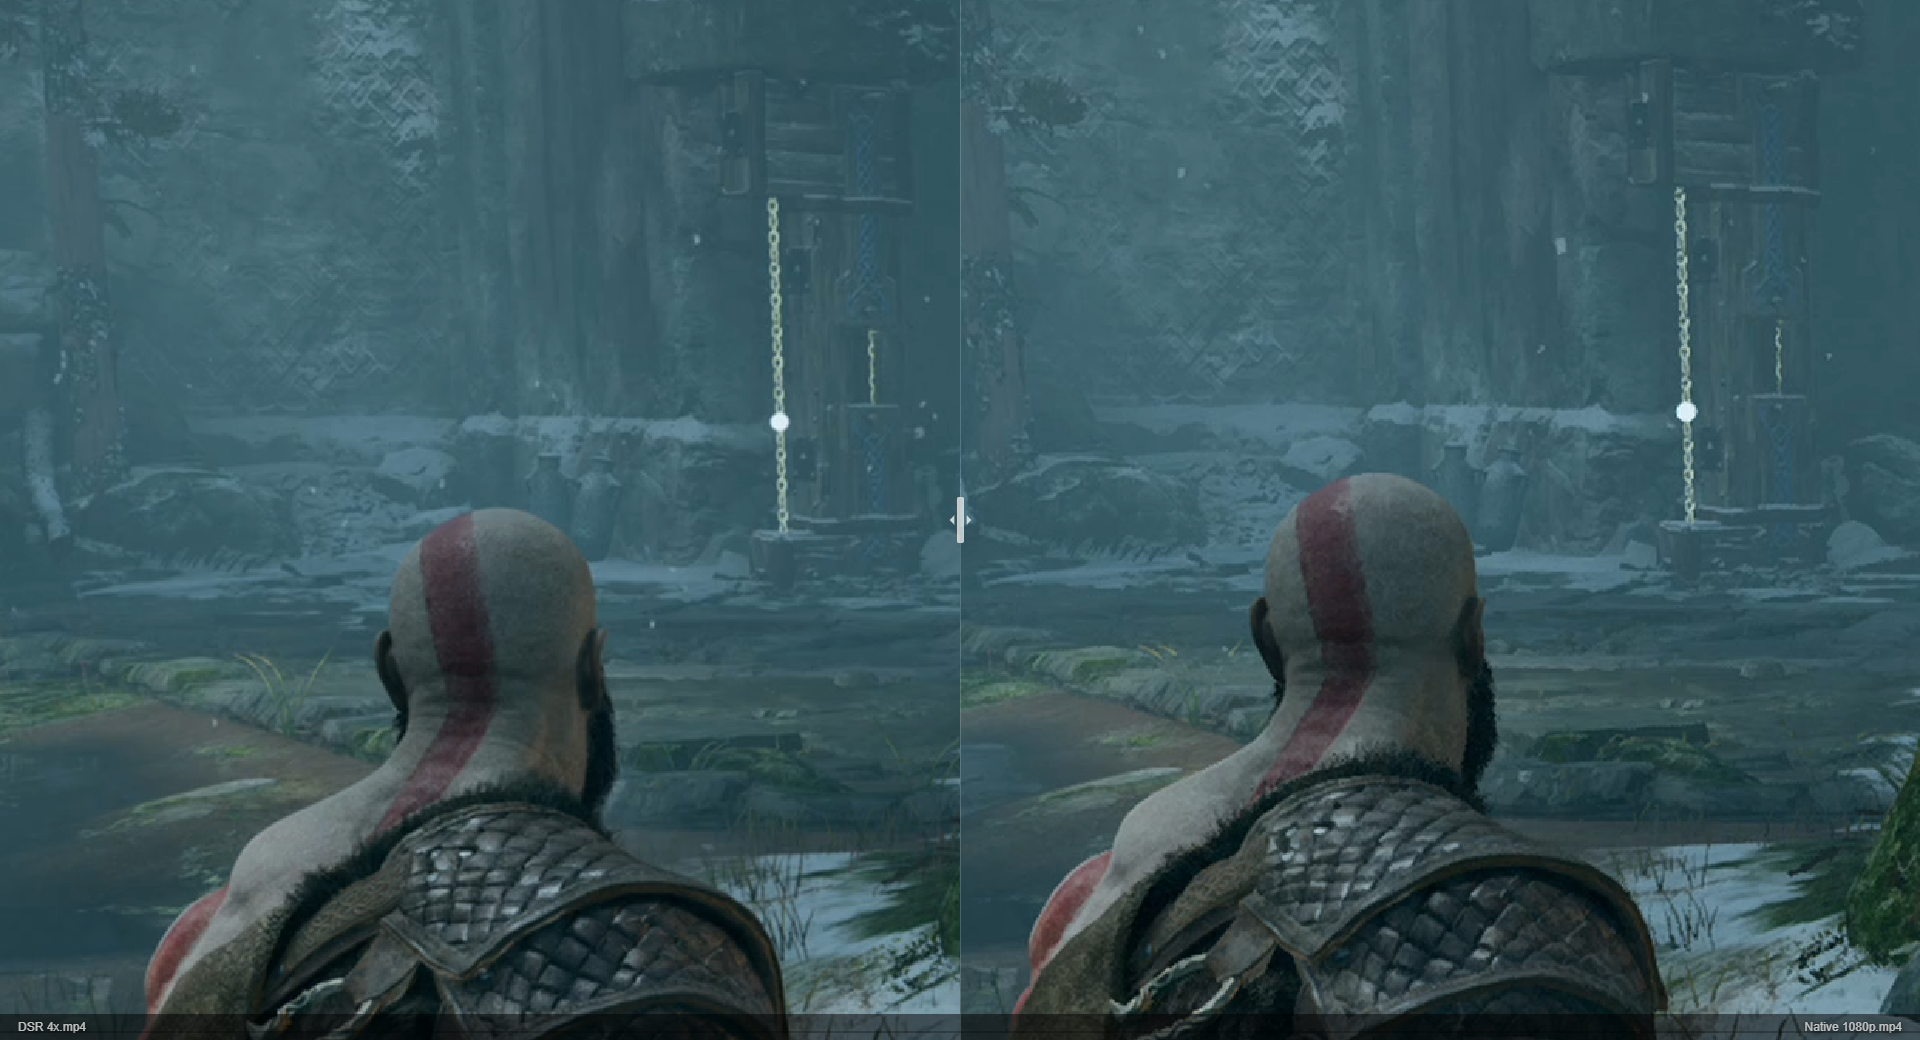 A God of War graphics comparison image showing DSR 4x on the left versus native rendering on the right.